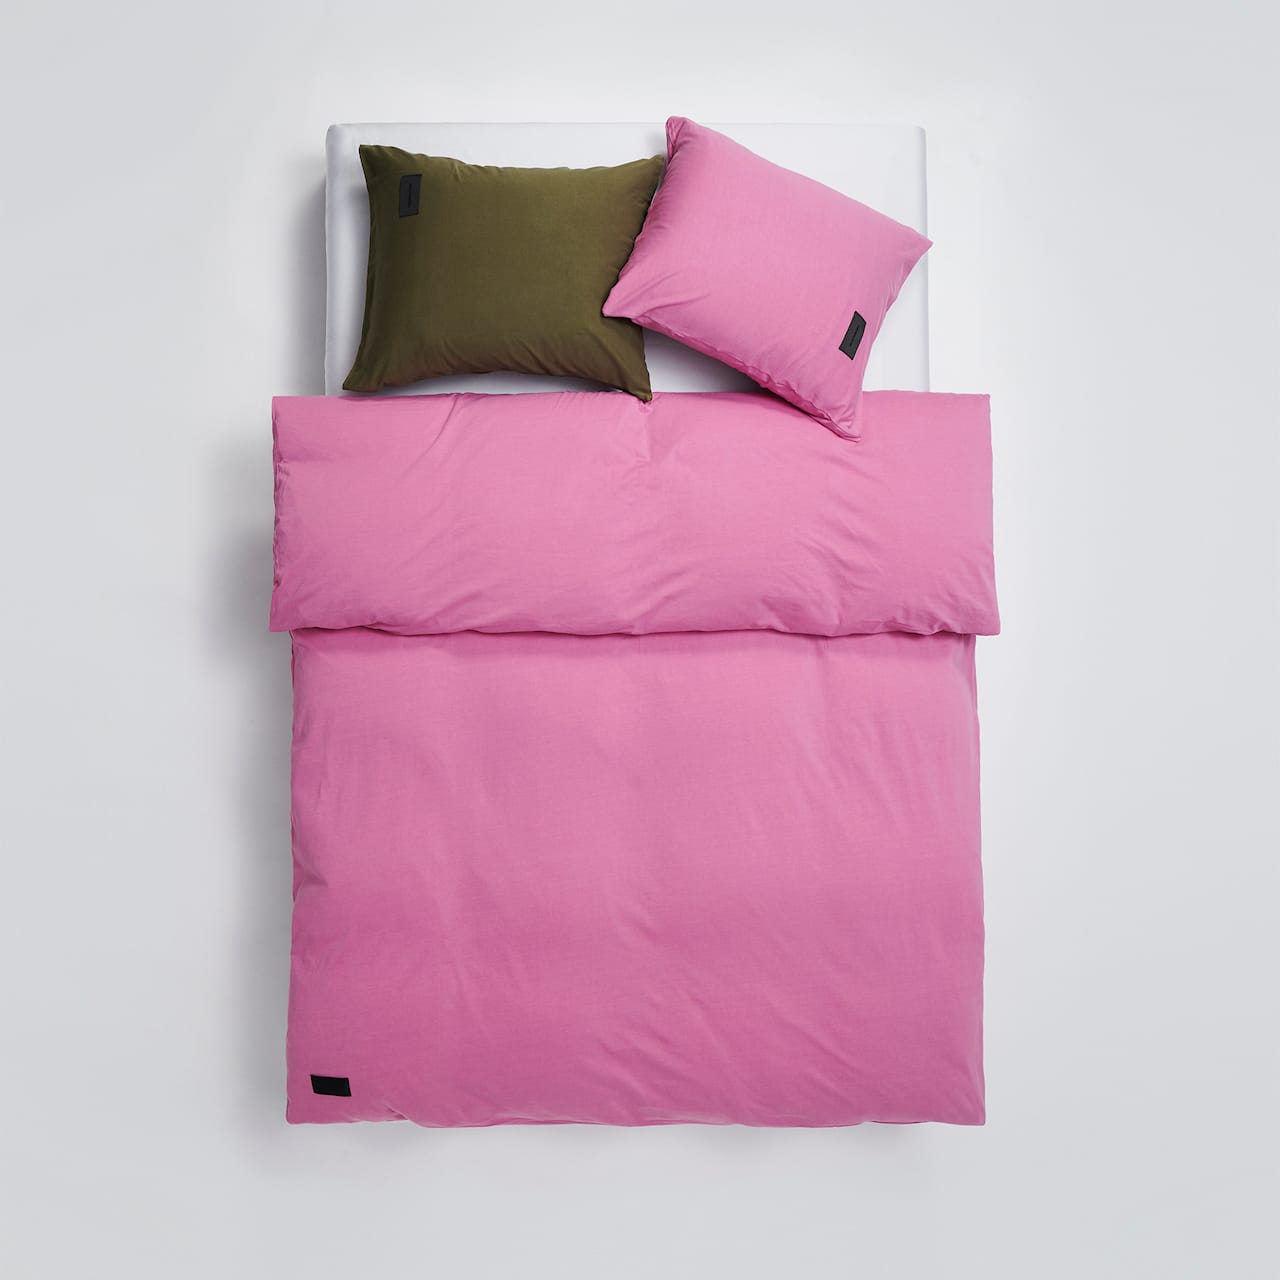 Nude Duvet Cover Jersey - Washed Orchid Pink